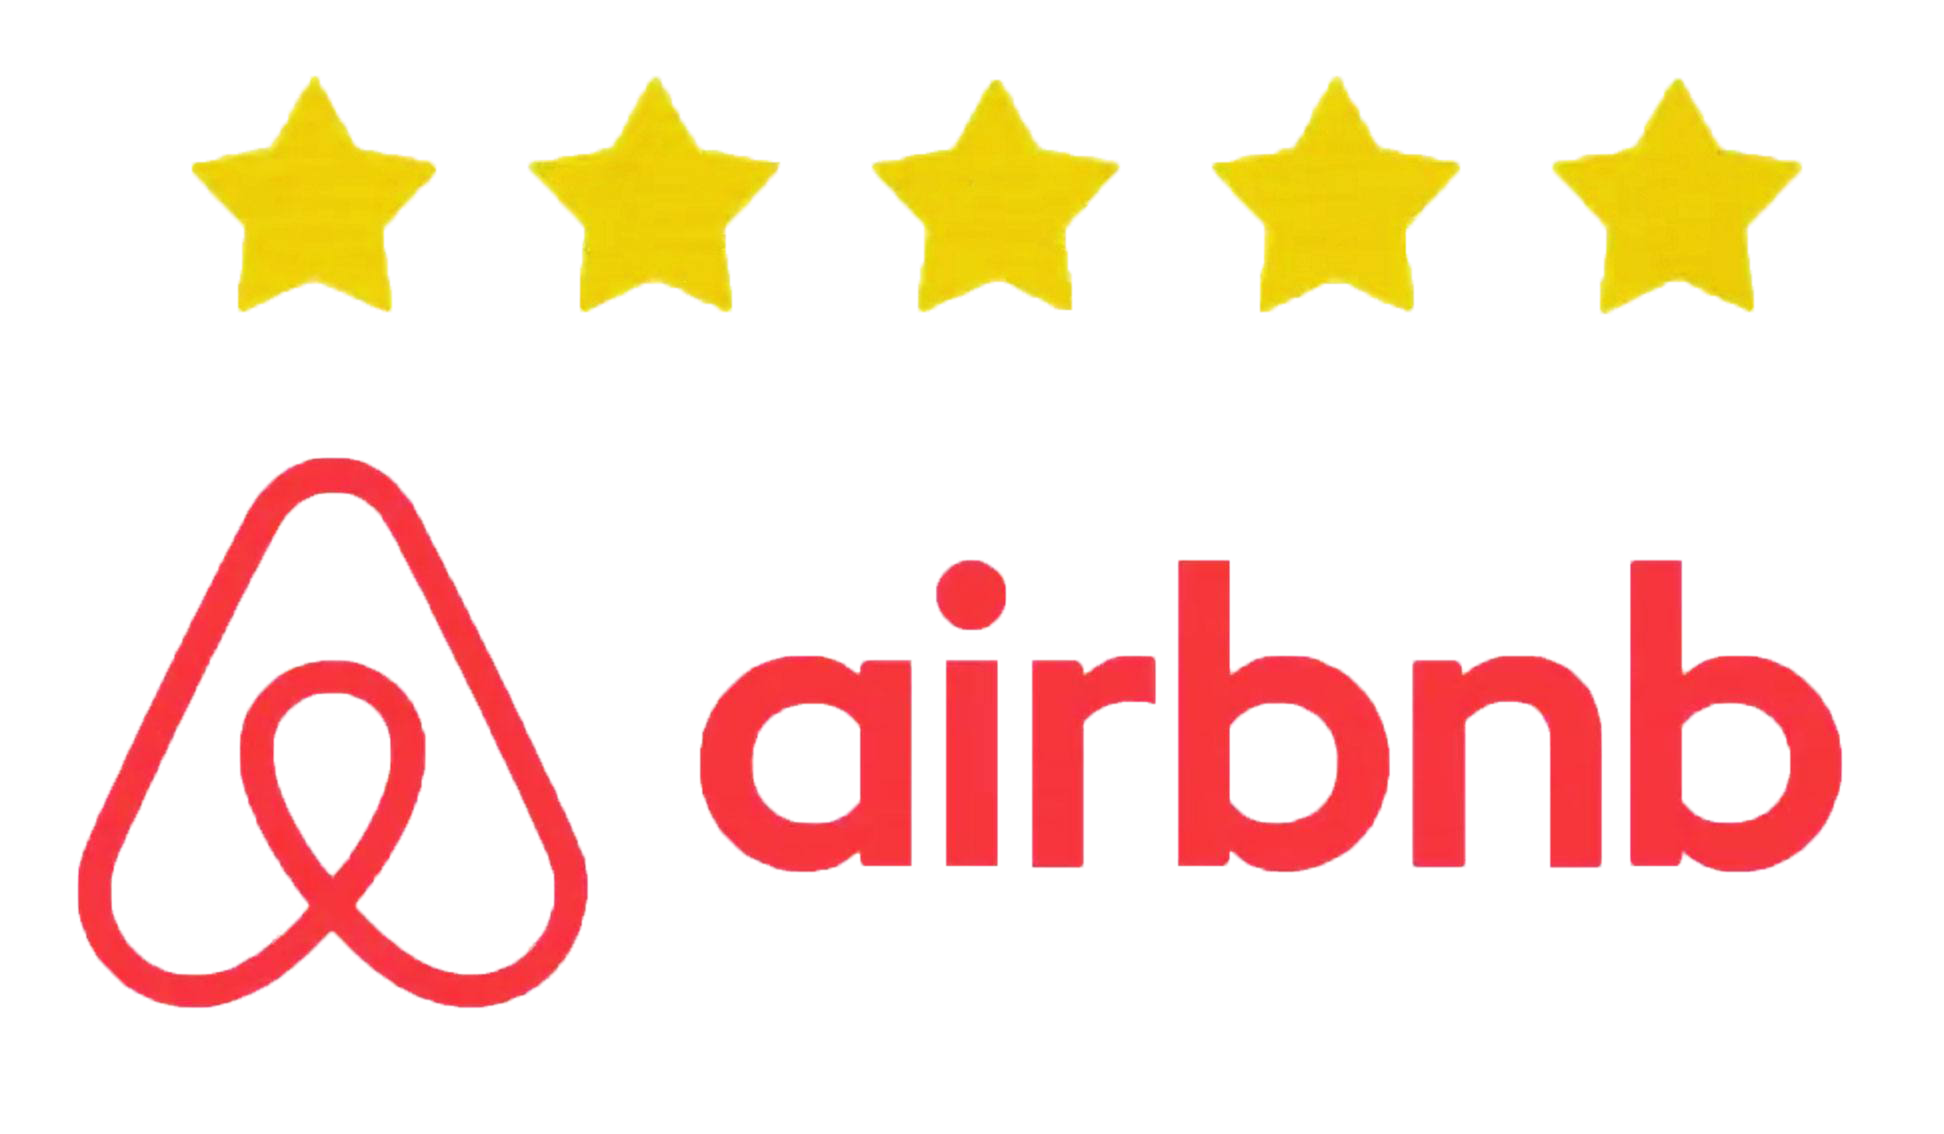 Review your recent stay on airbnb here